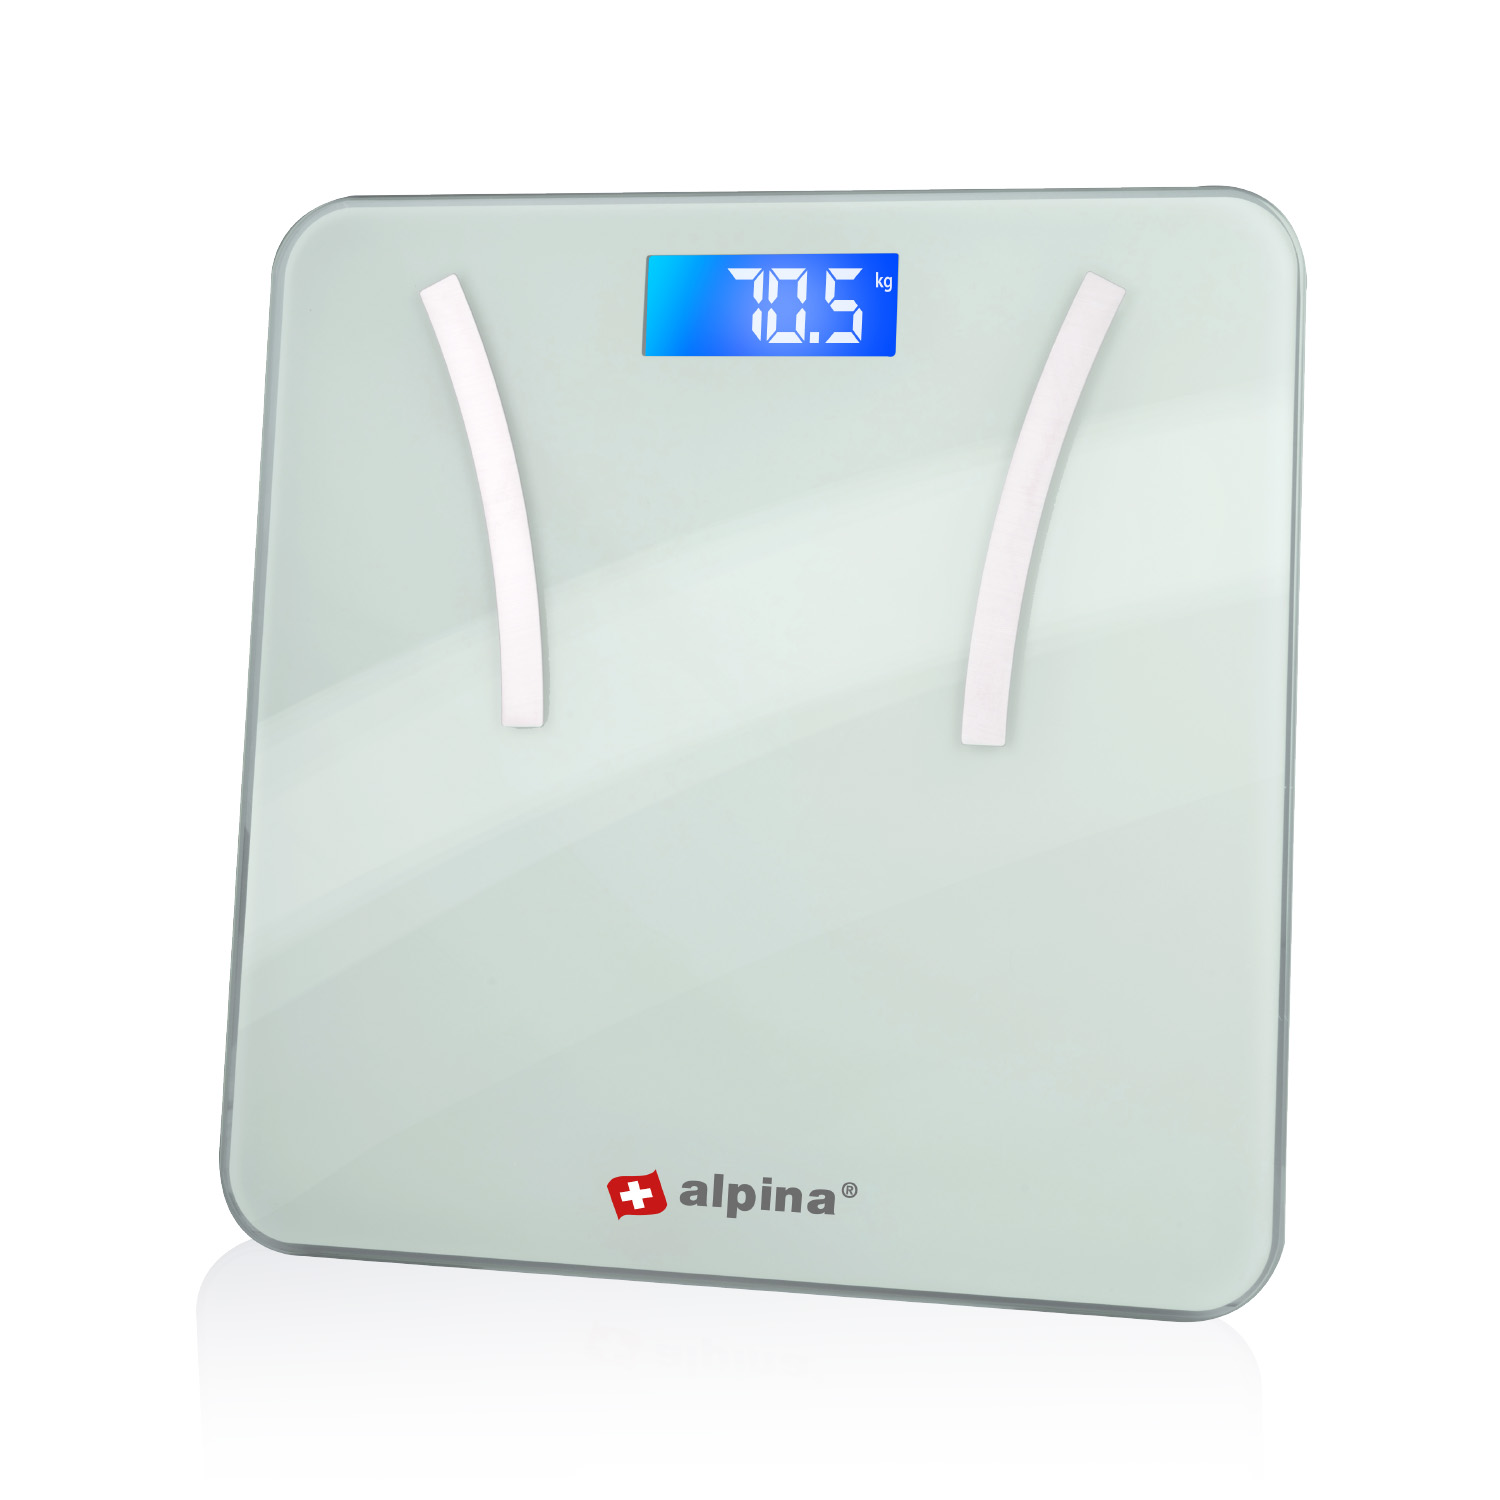 Smart Body scale with full body analysis